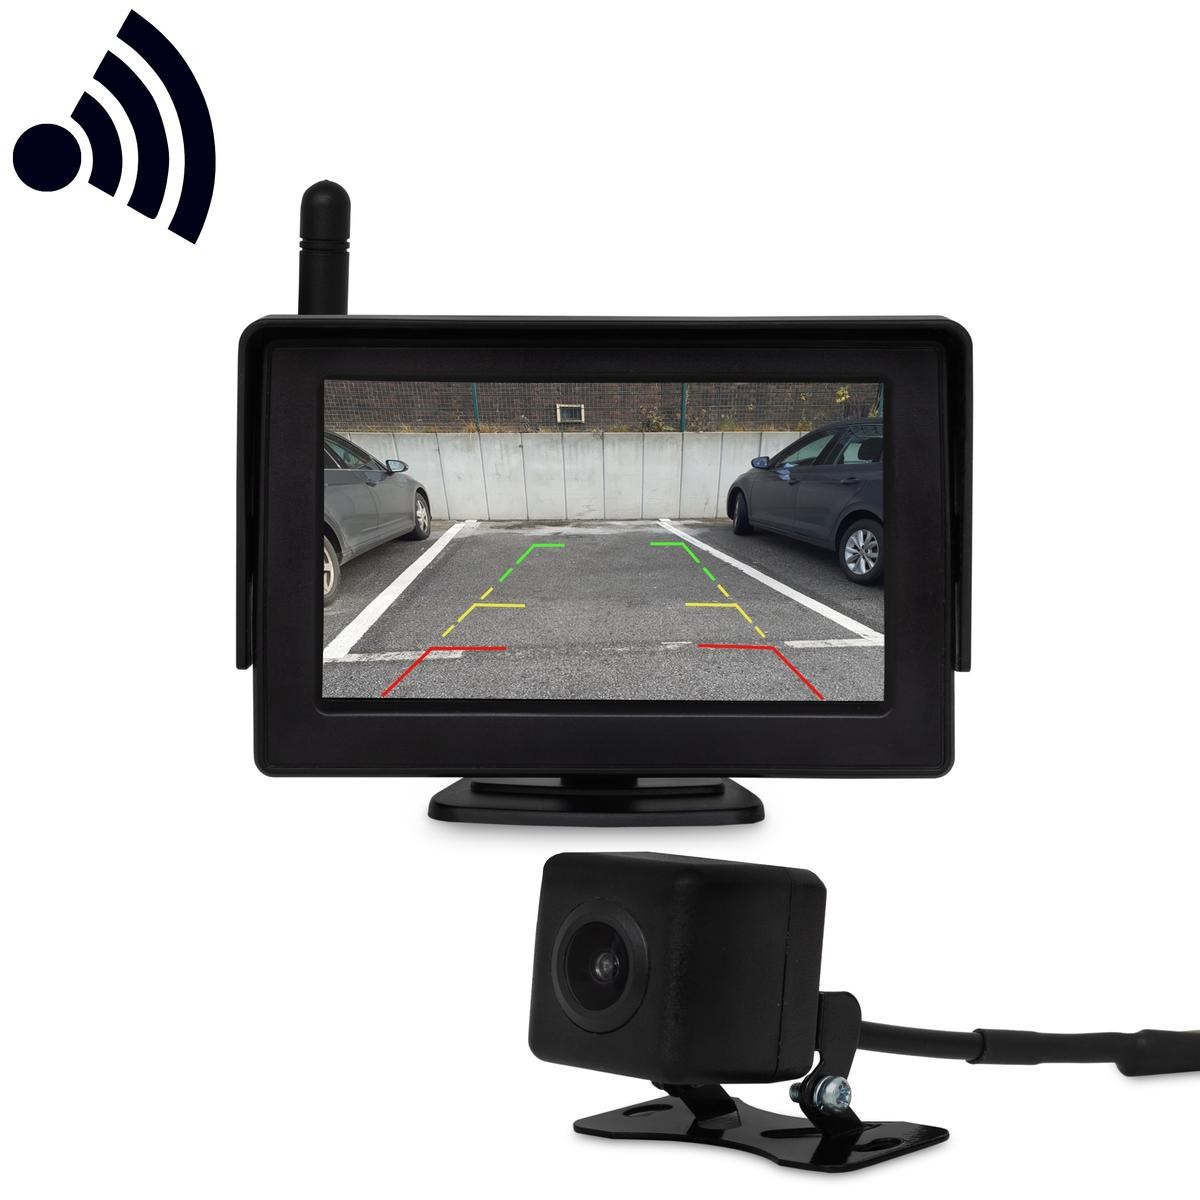 JOM 7122 Car reverse camera VW Golf 4 (1J1) 170° with monitor, kit, radio/wireless Waterproof, with accessories with camera